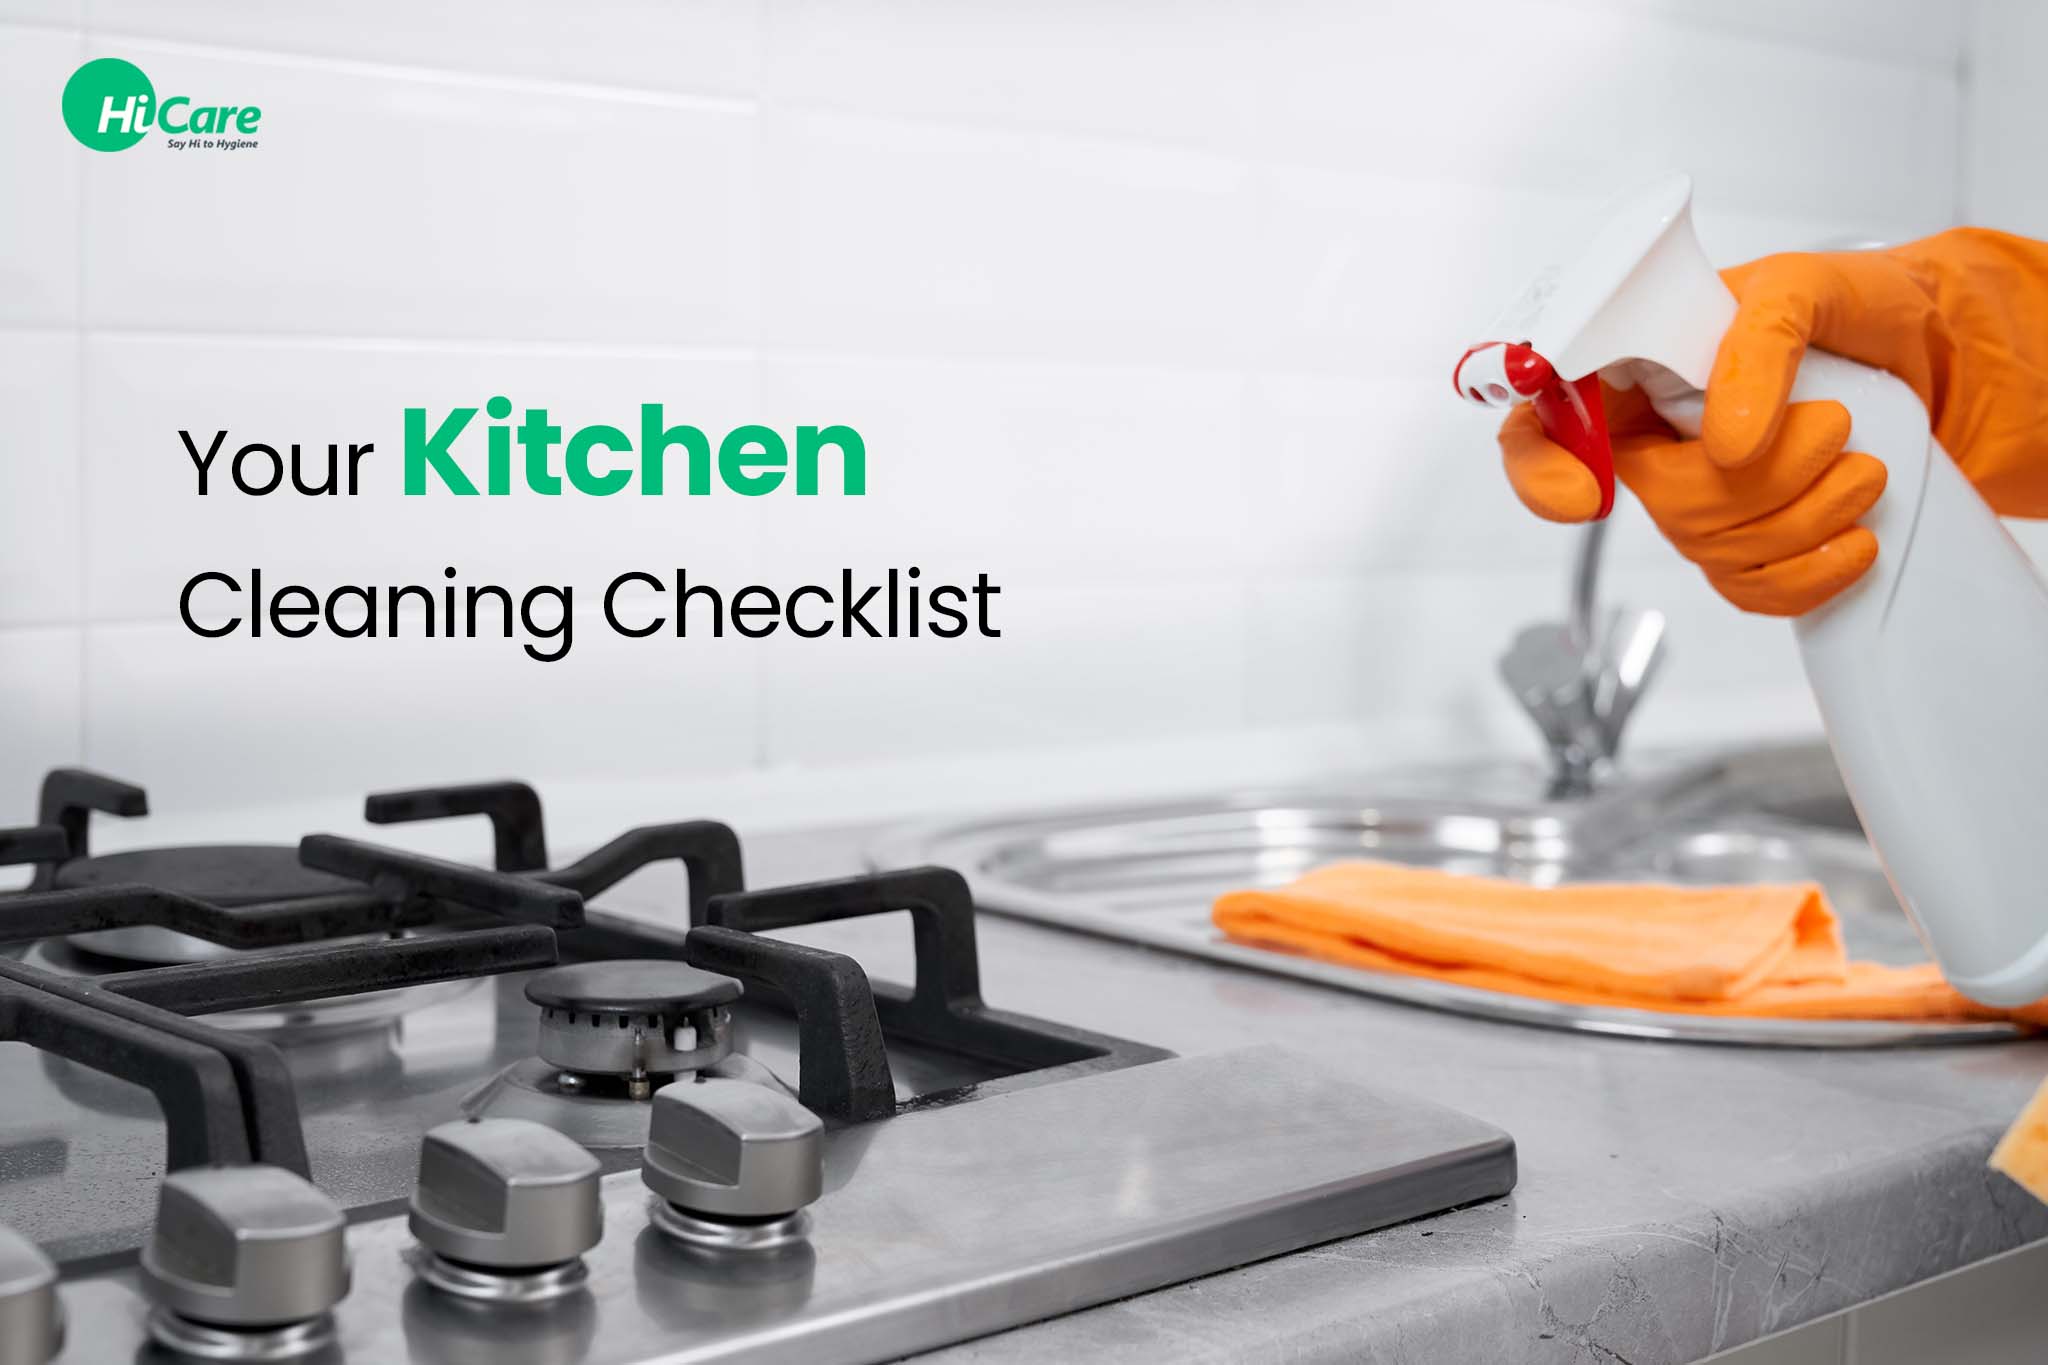 How to Clean a Kitchen: A Kitchen Cleaning Checklist